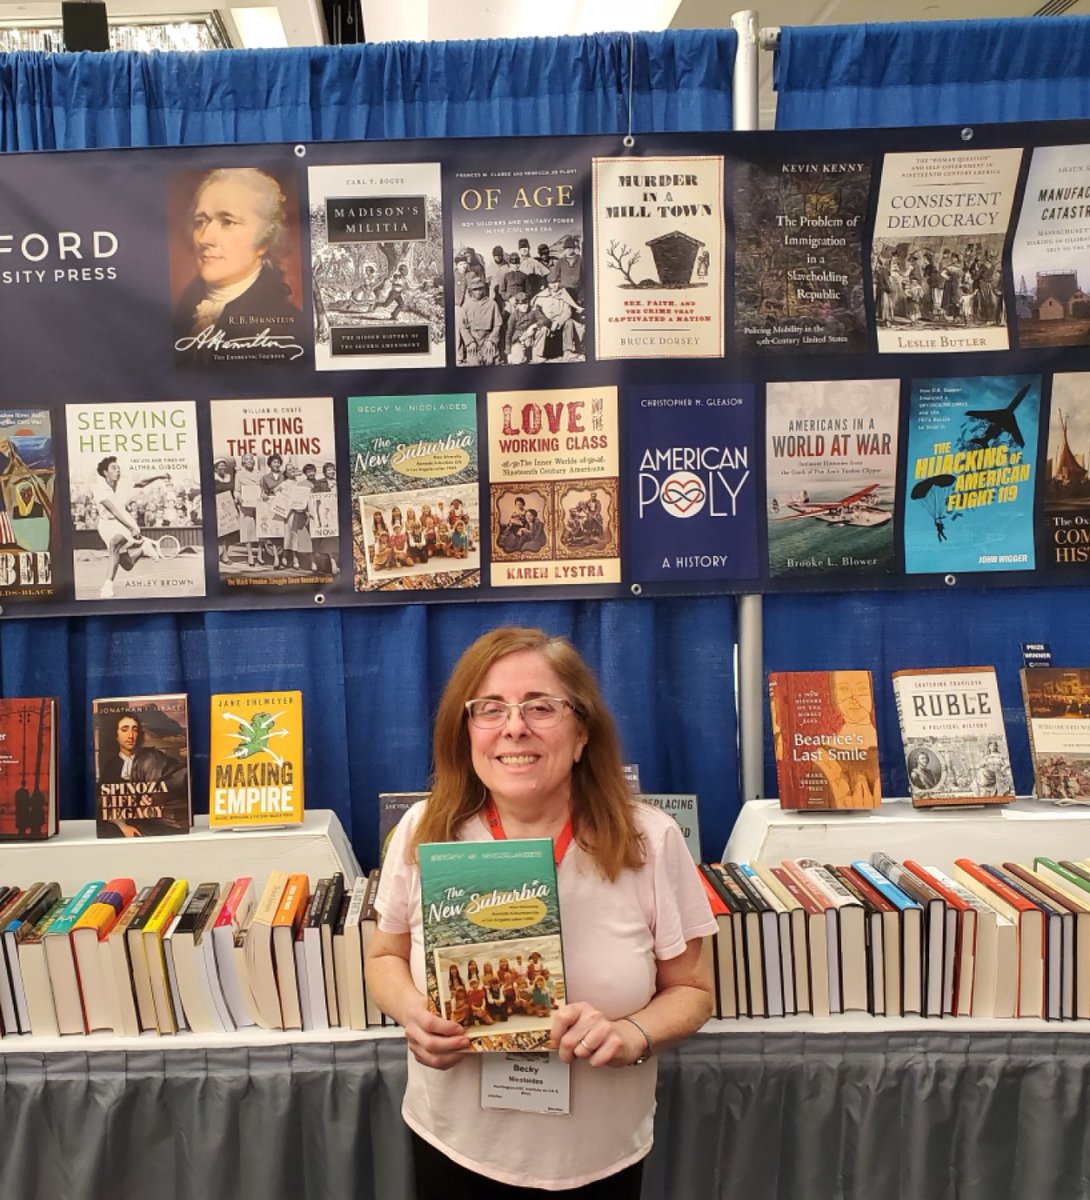 We can't believe #AHA24 was already a week ago! We had a great time and enjoyed seeing some of our authors, including @migrationhist and @BeckyNic7. There is still time to save on select titles with conference discount EXAHA24, browse all titles here: oxford.ly/3TWsmOa